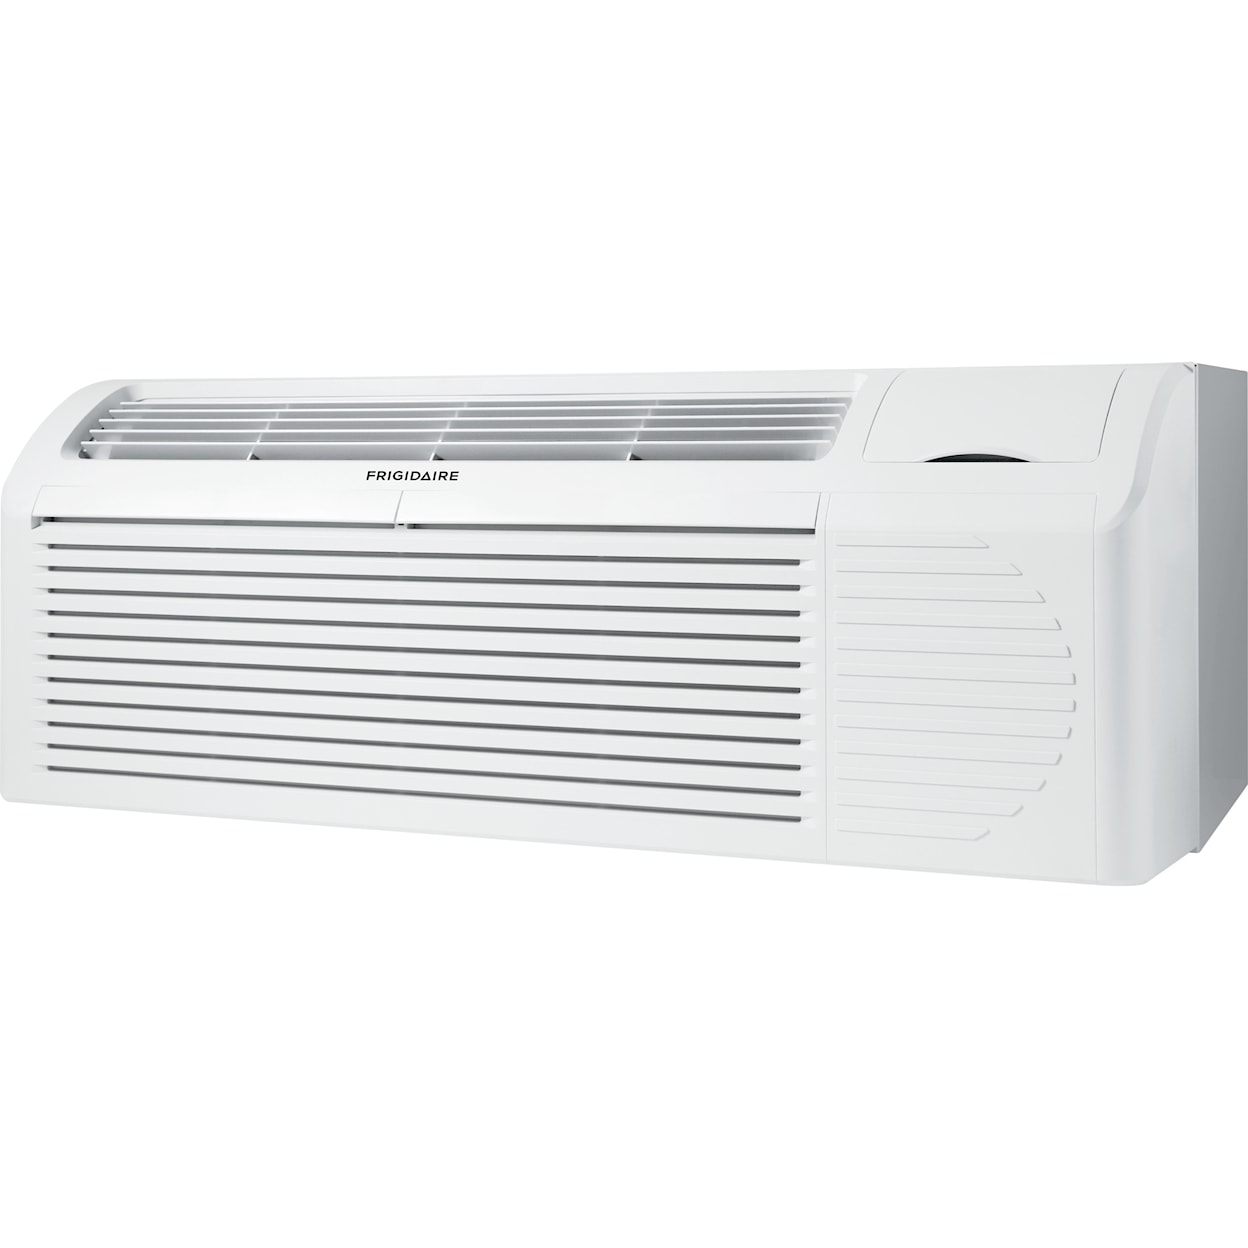 Frigidaire Air Conditioners PTAC unit with Electric Heat 12,000 BTU